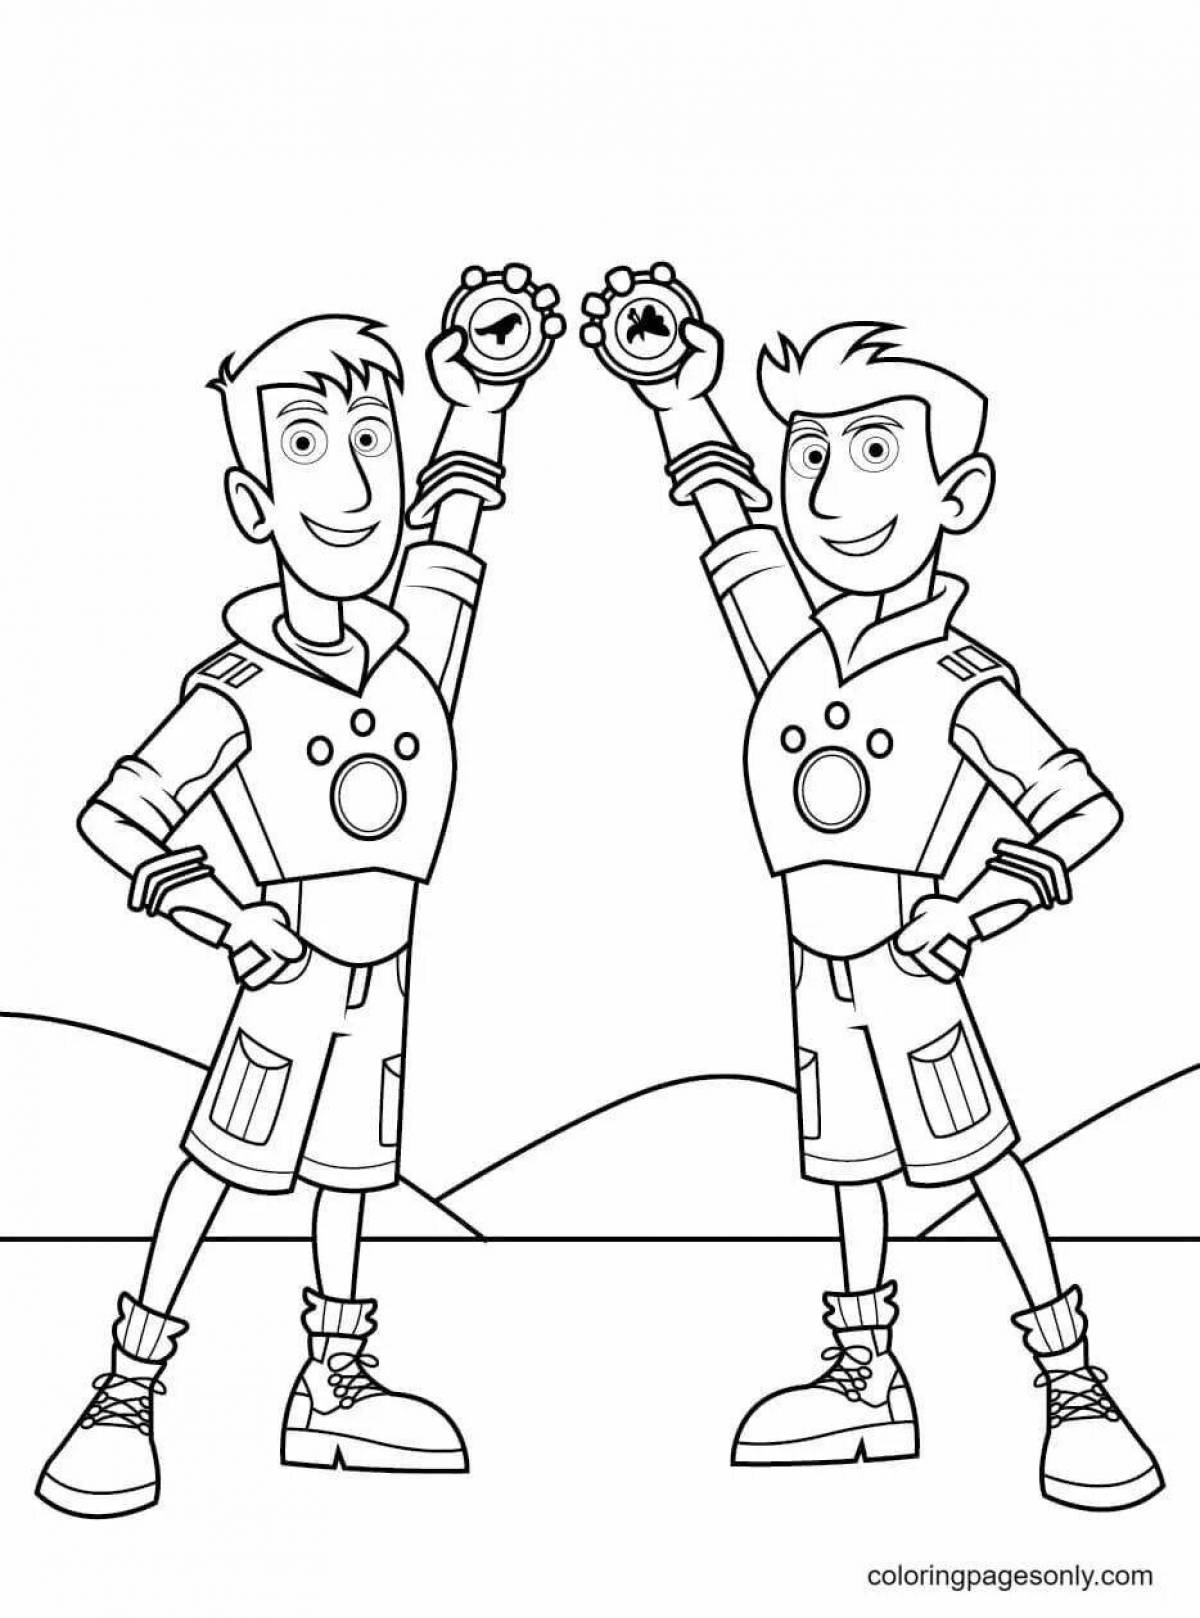 The kratt brothers' colorful coloring design